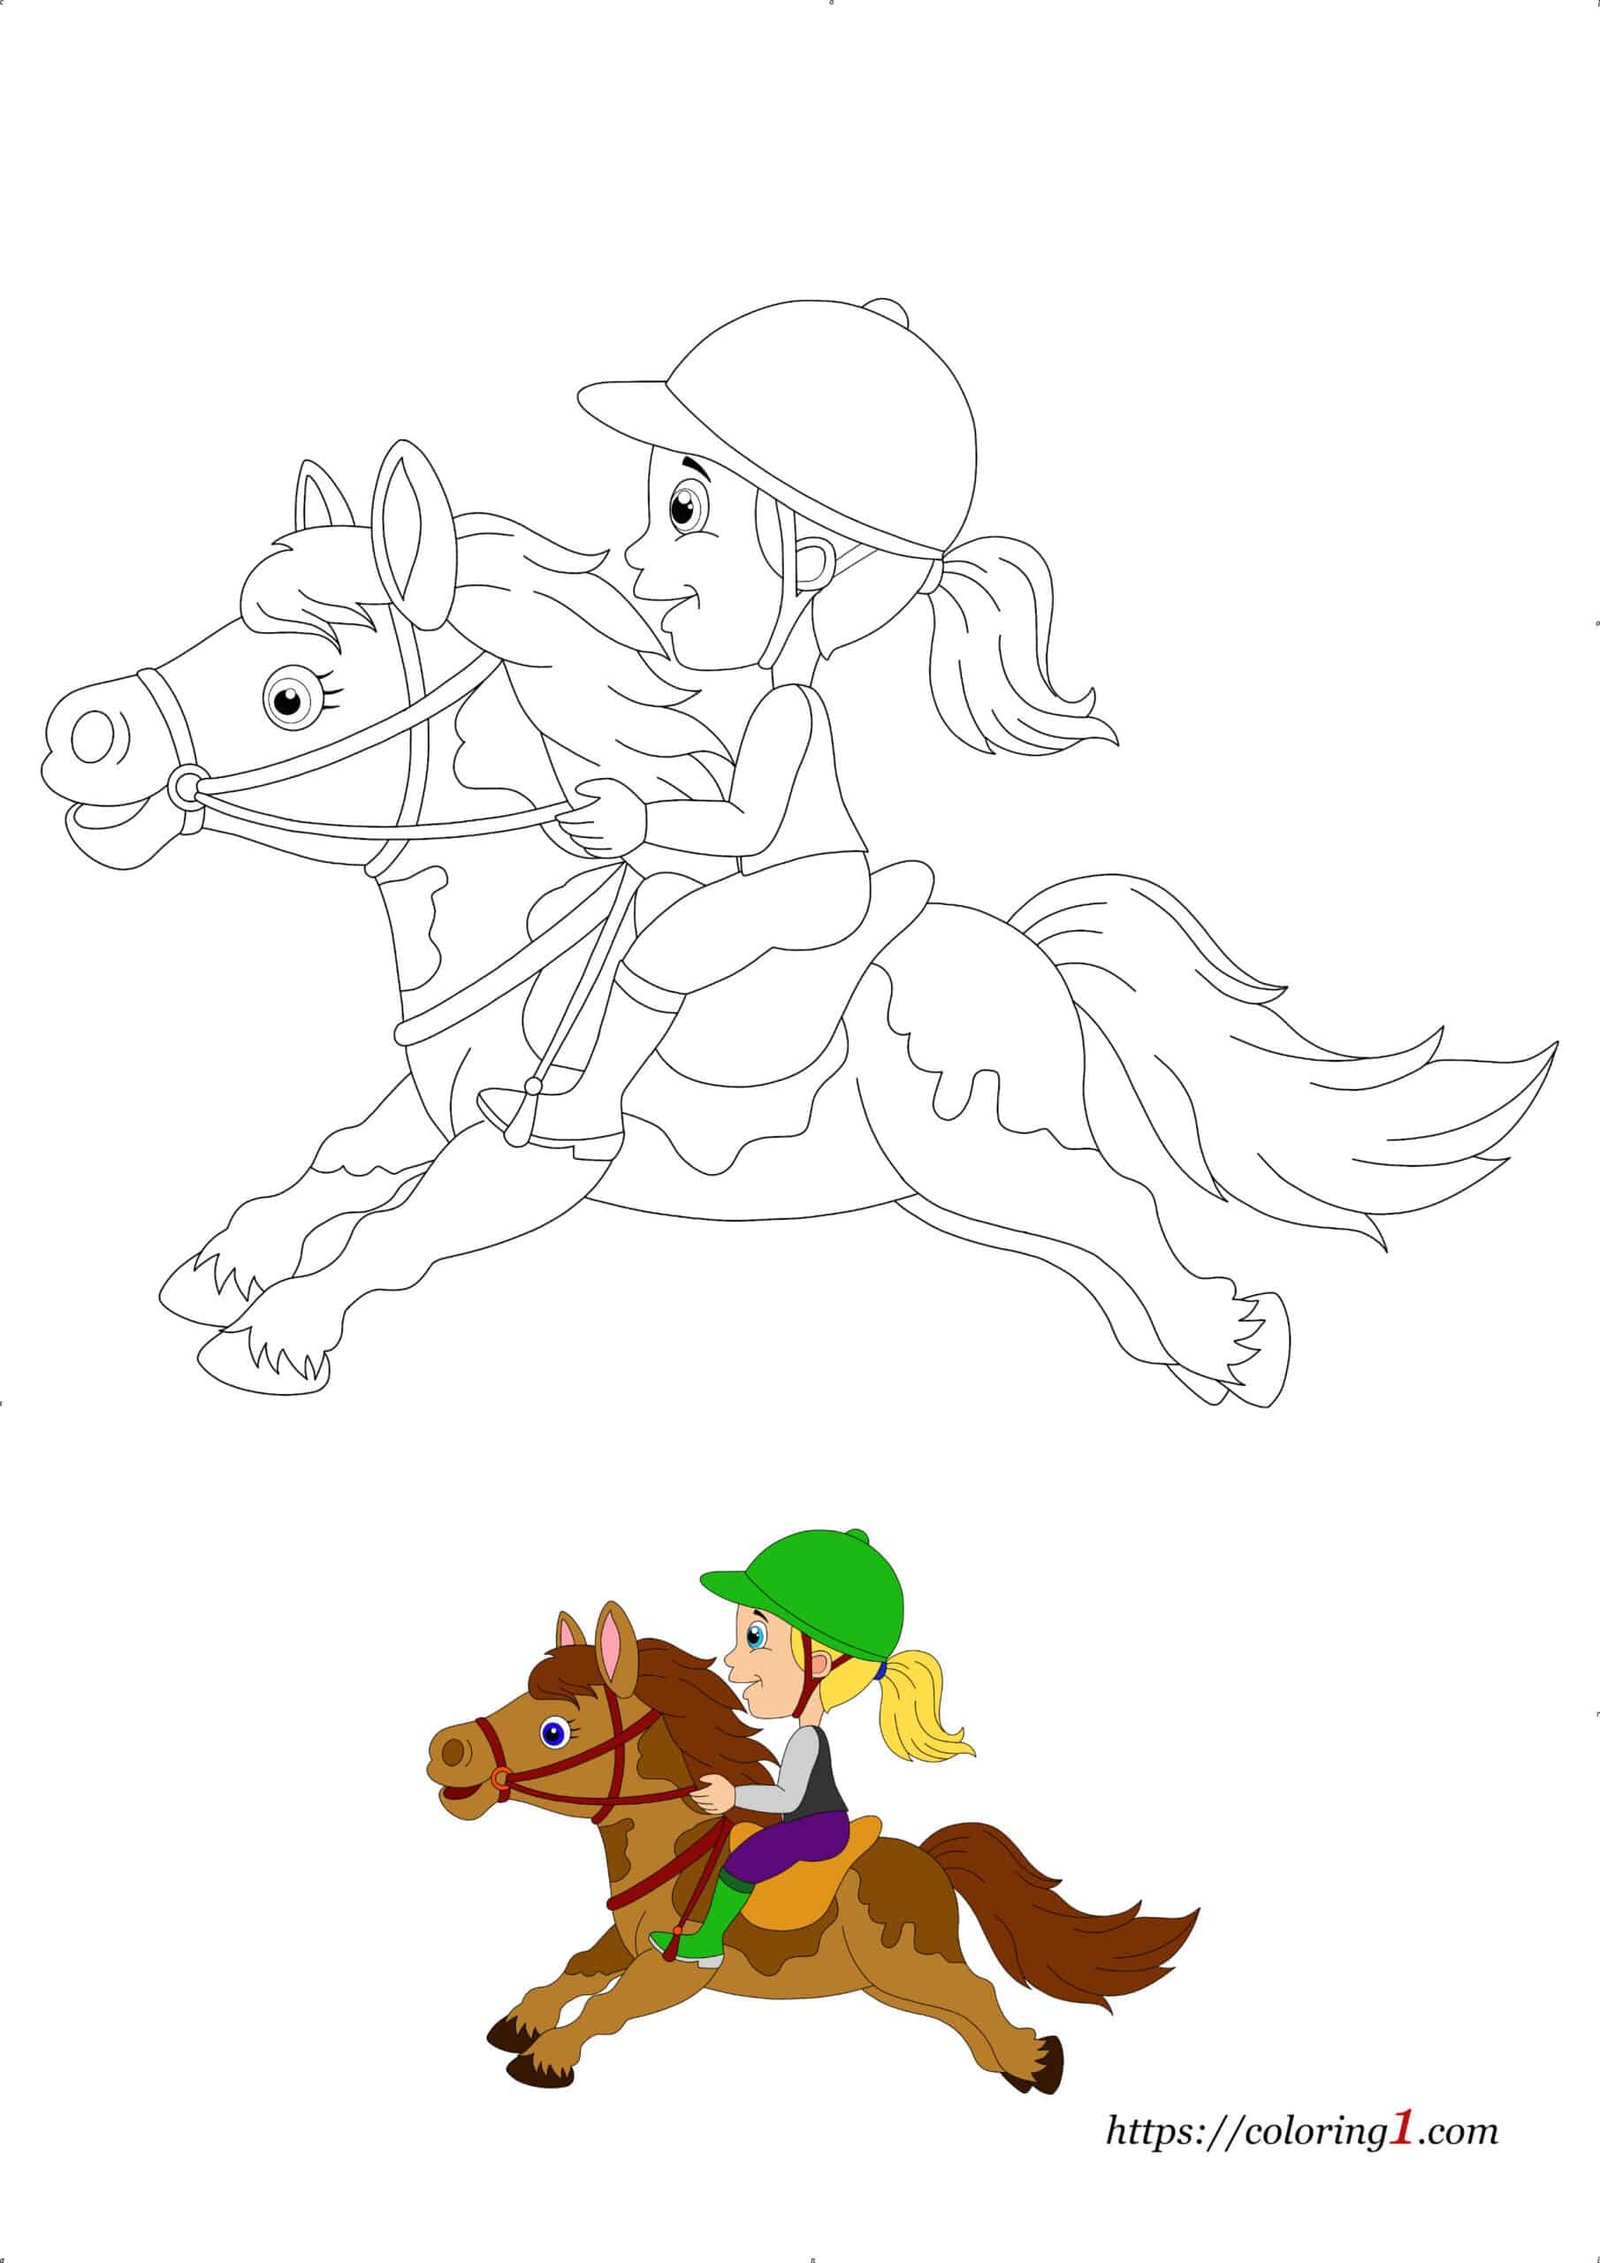 Horse Racing printable coloring page for kids